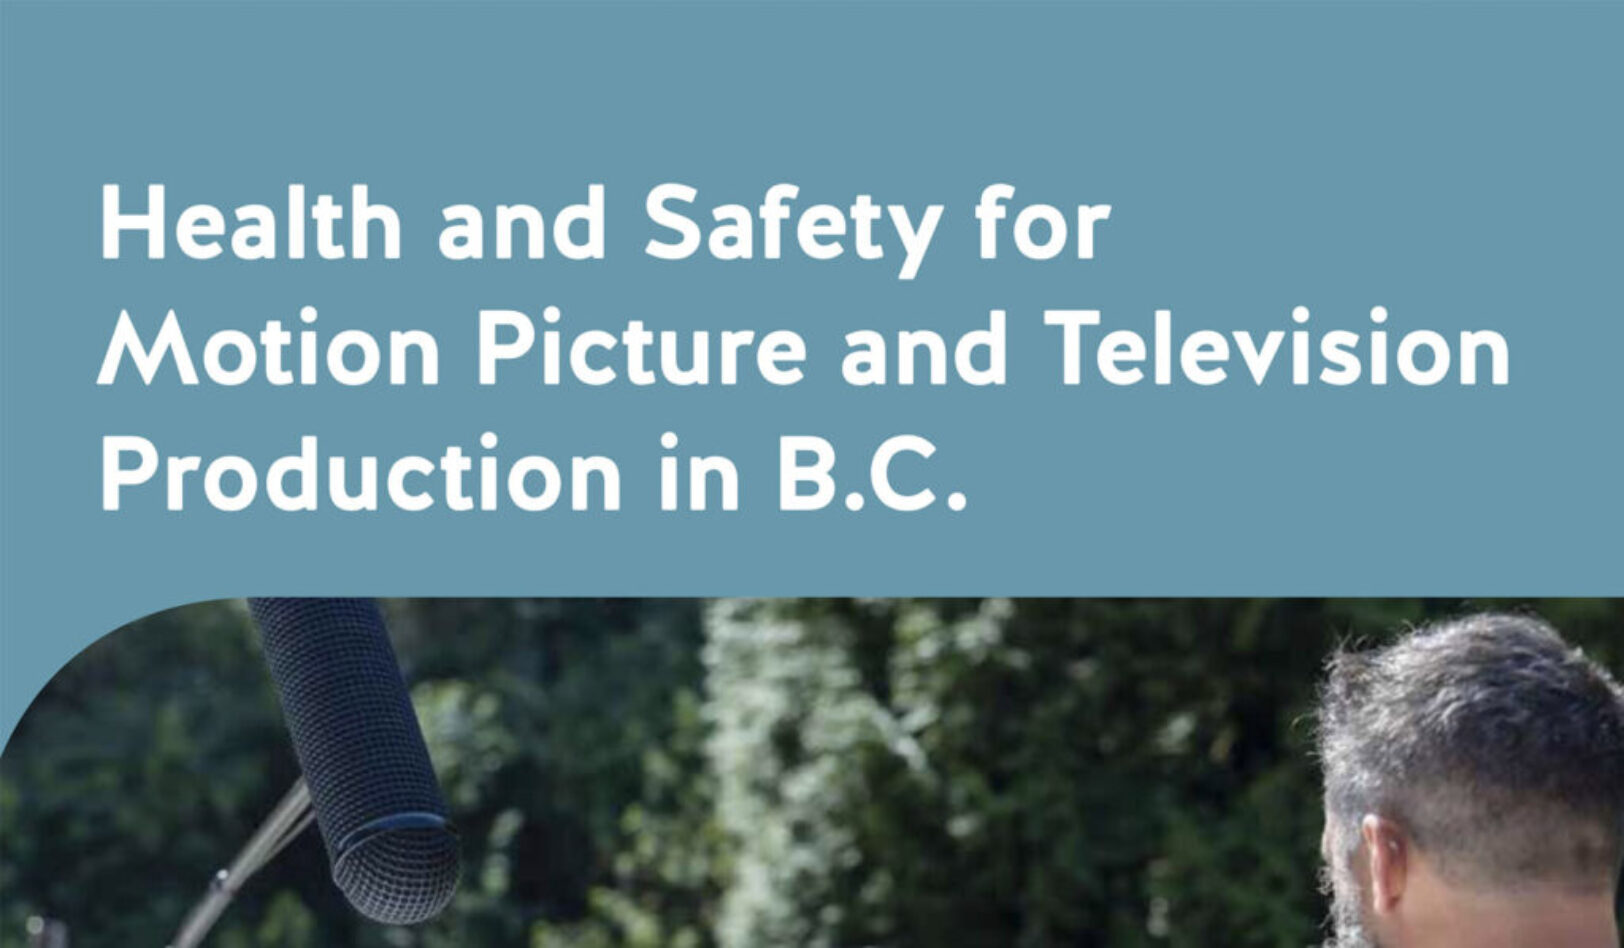 Health and Safety for Motion Picture and Television Production in B.C.